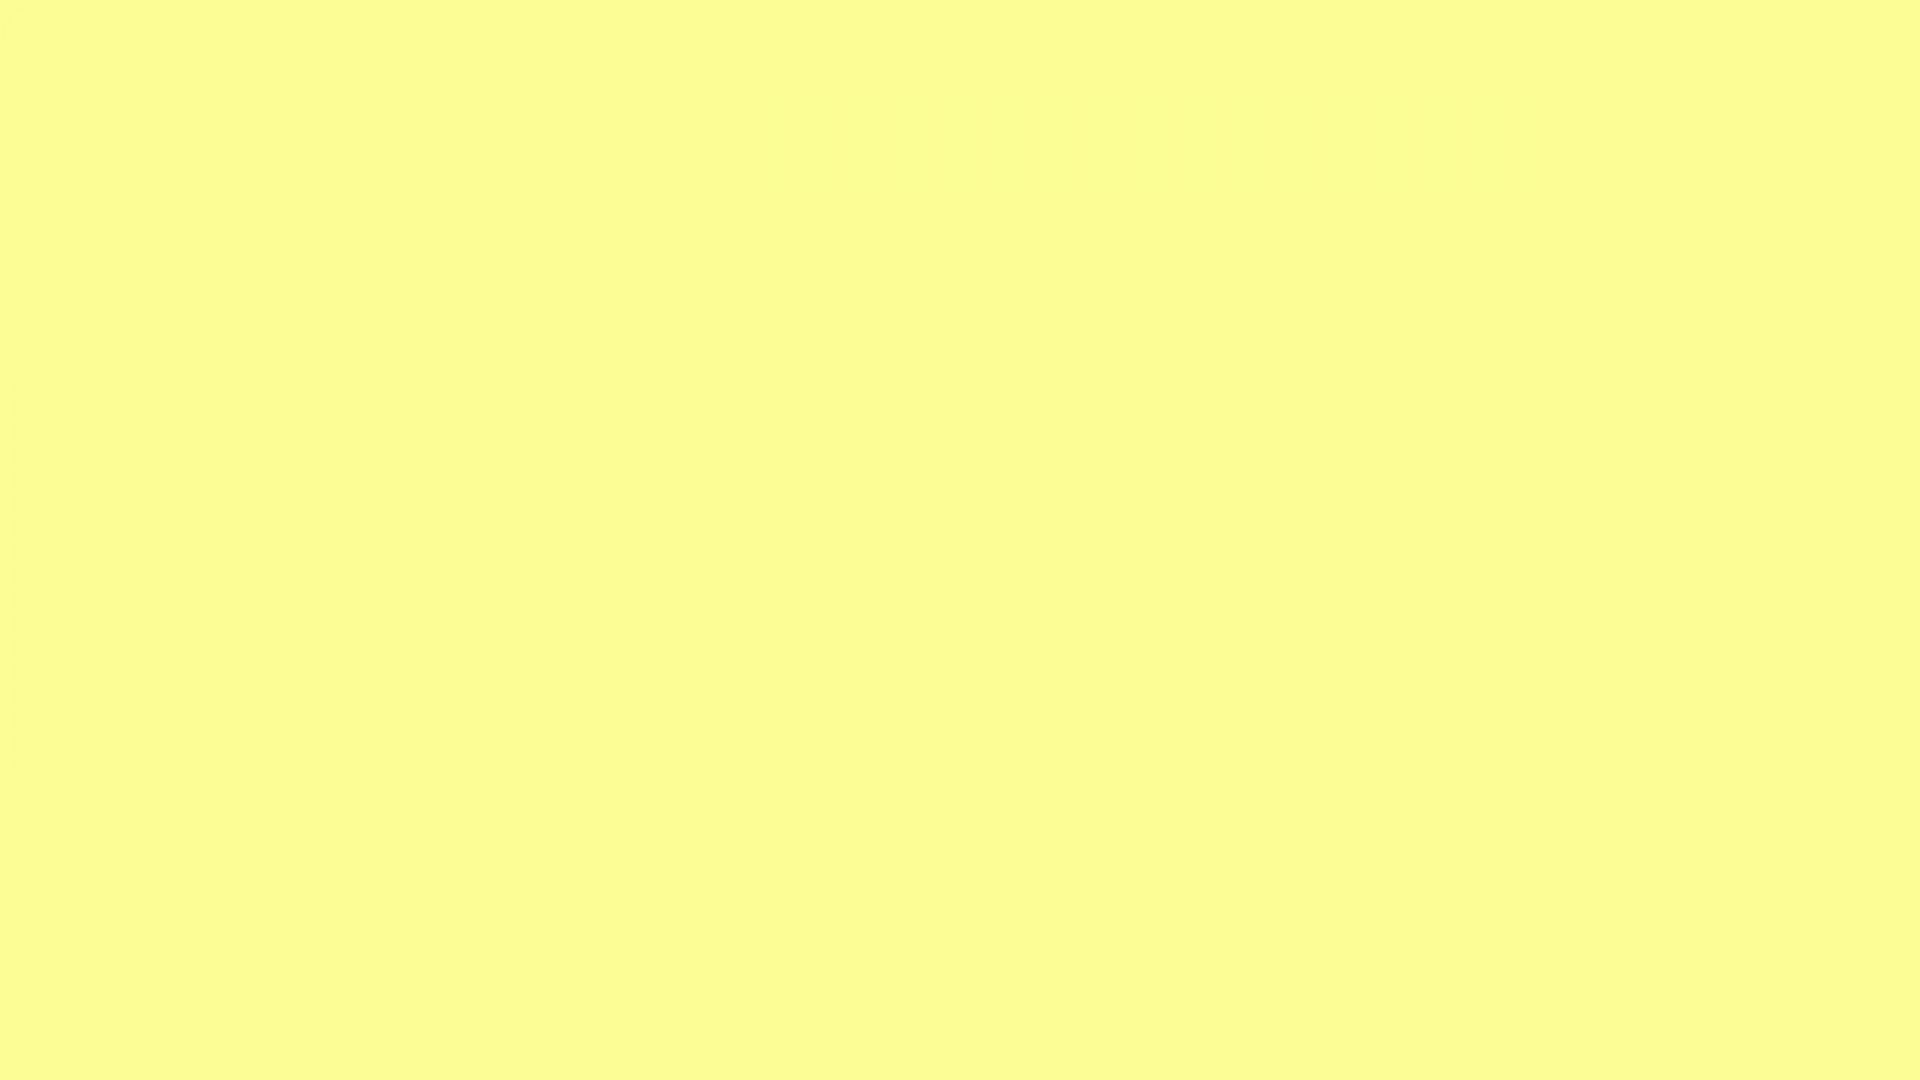 Free download 2560x1440 Pastel Yellow Solid Color Background